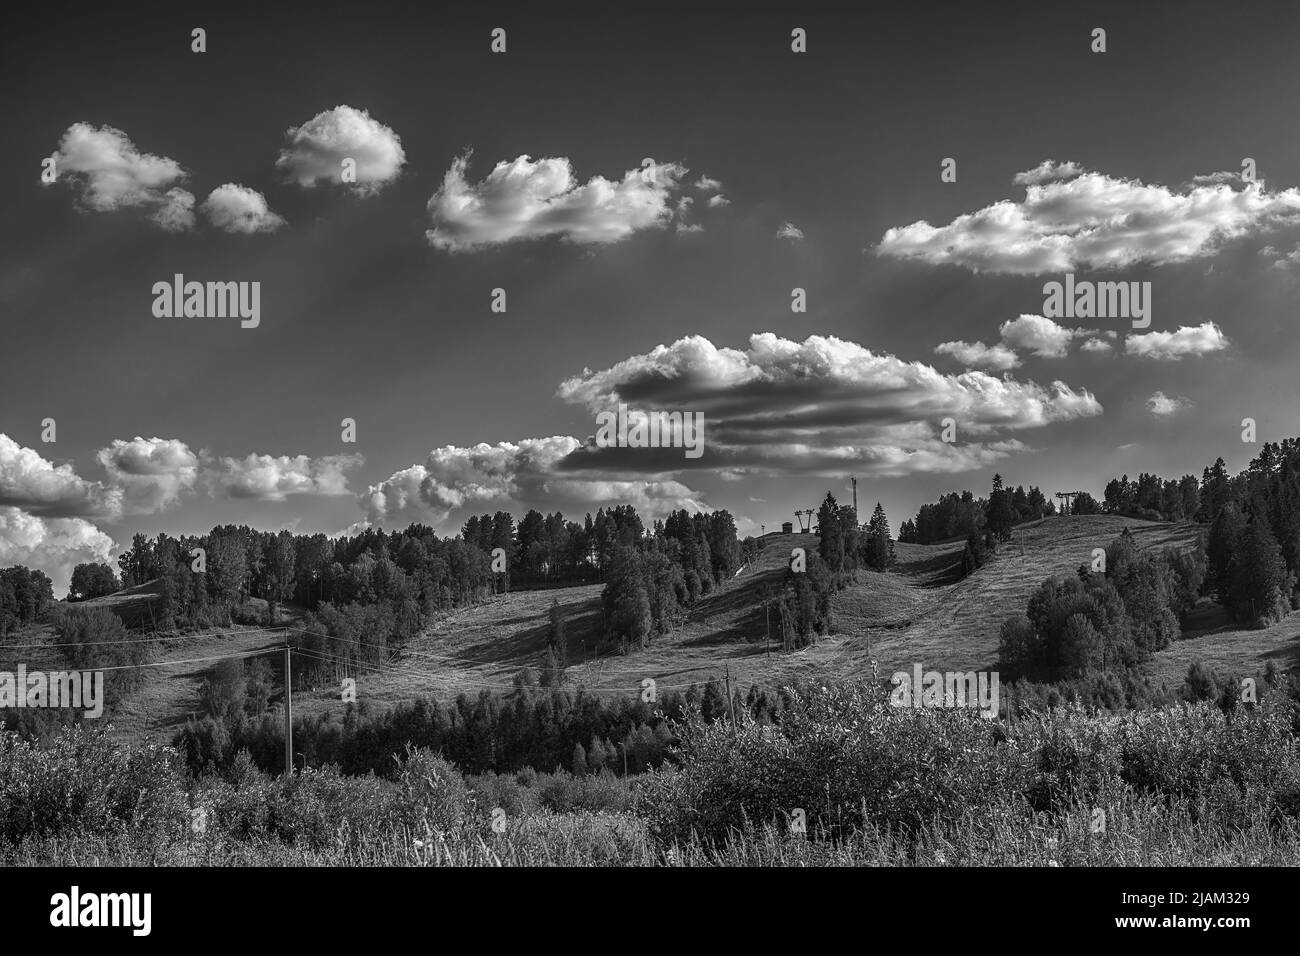 Dramatic summer scenic landscape with ski slopes in summer and dark dramatic sky. Ski resort in summer. Black and white artistic image Stock Photo